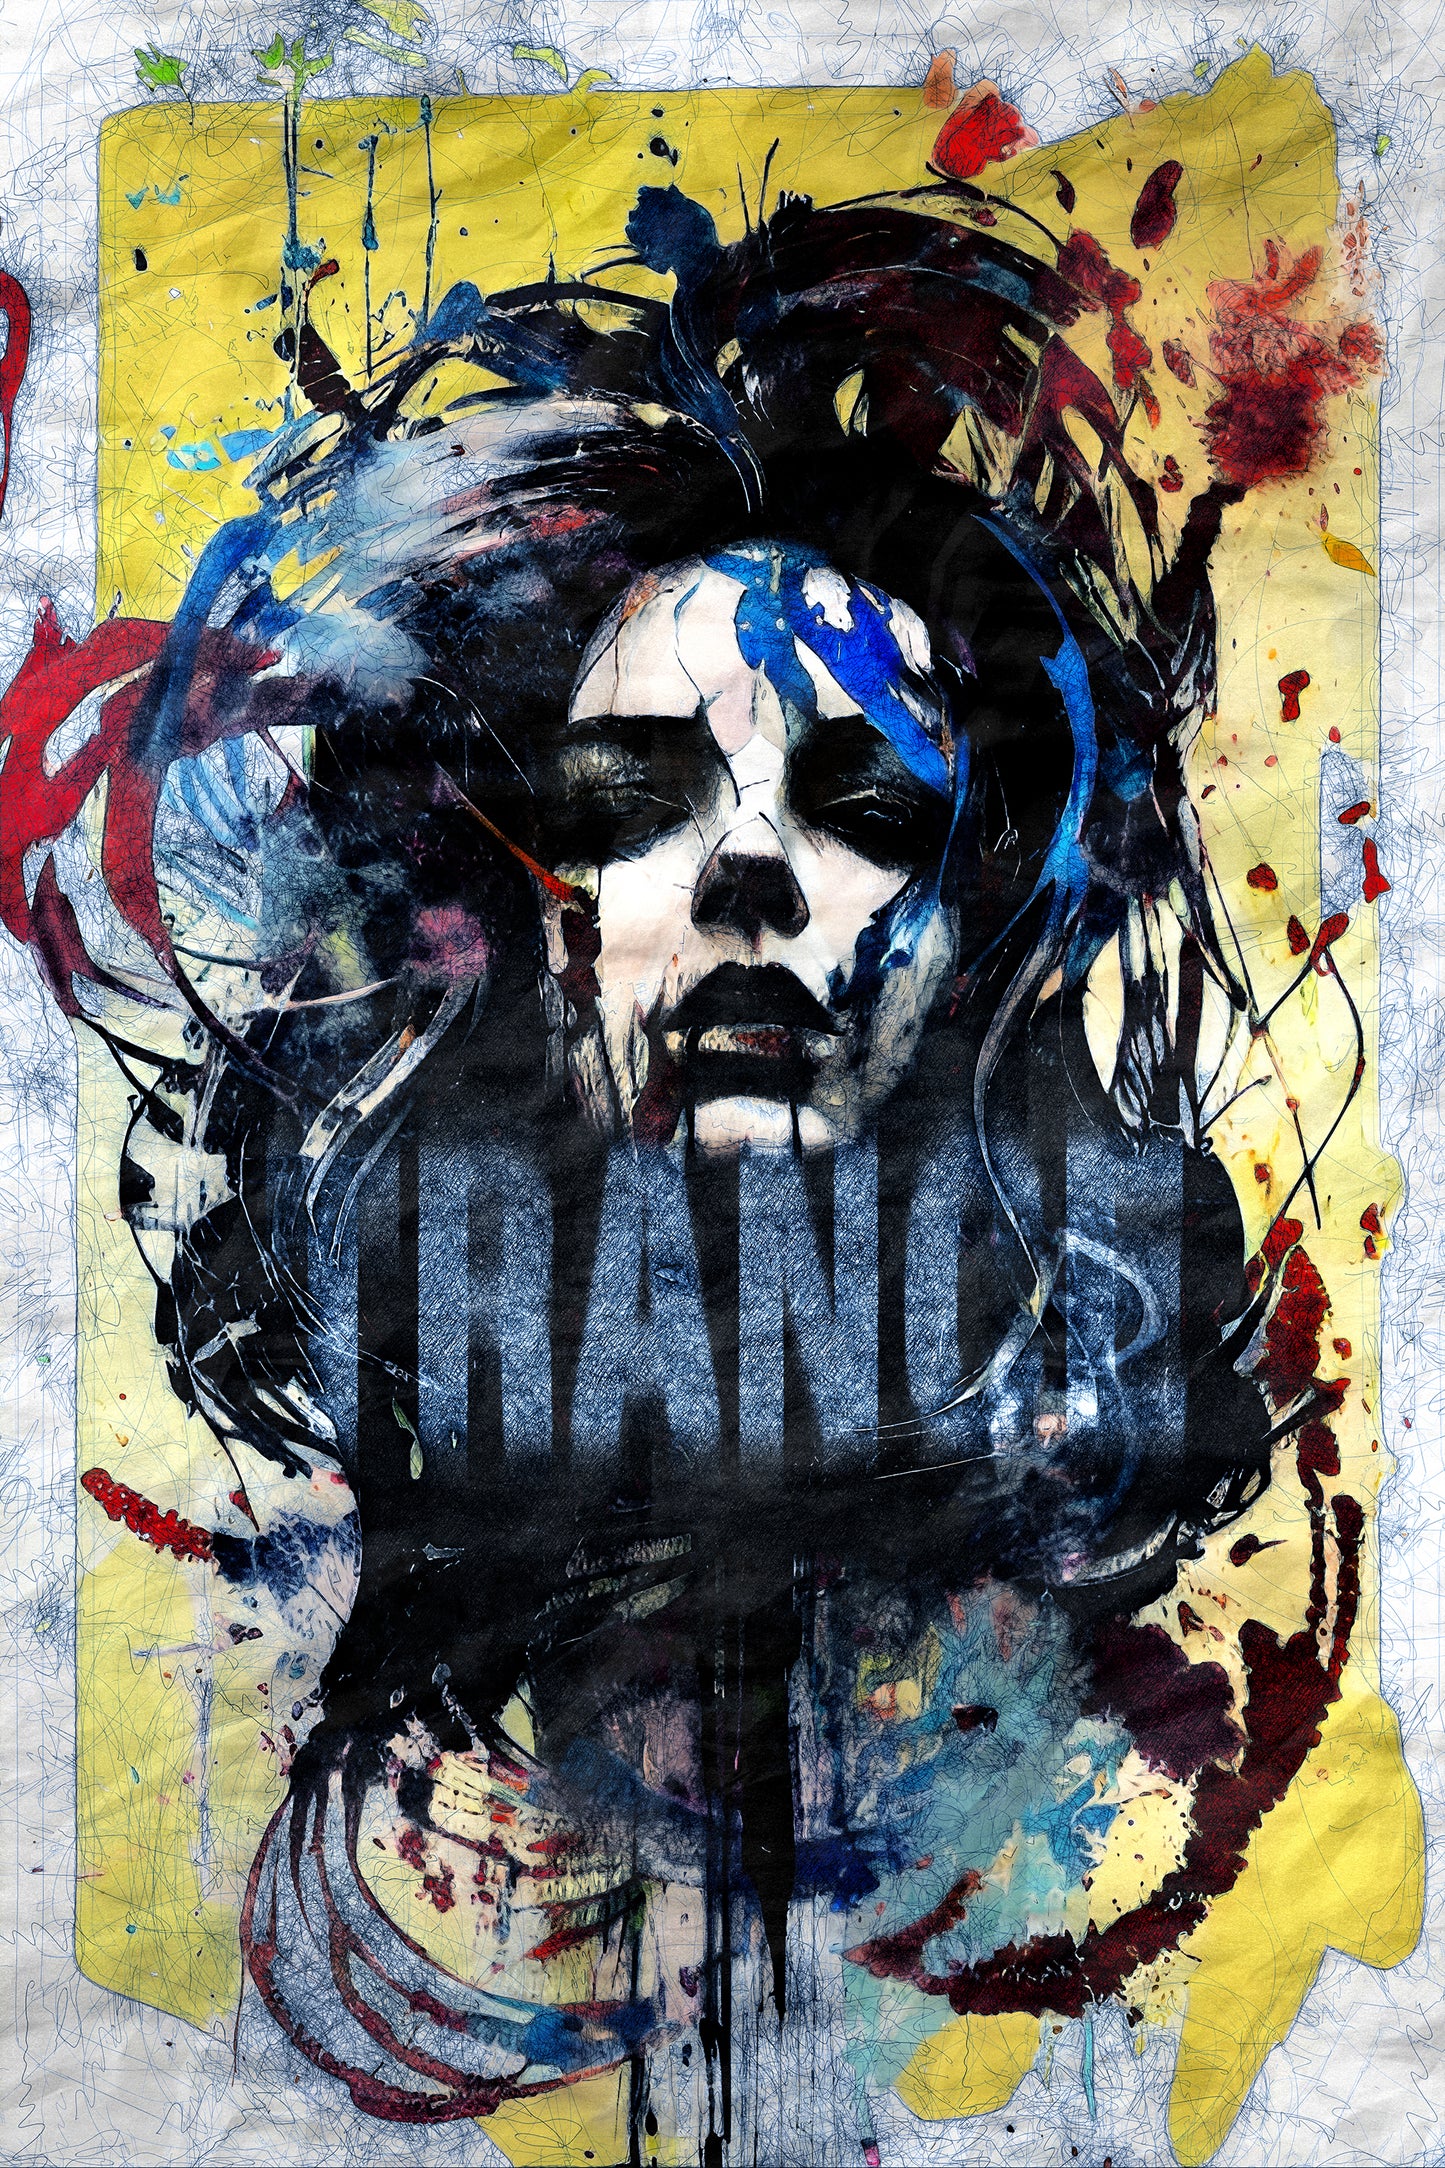 Portrait of a girl with "TRANCE" text and dynamic red and blue swirls on a yellow background